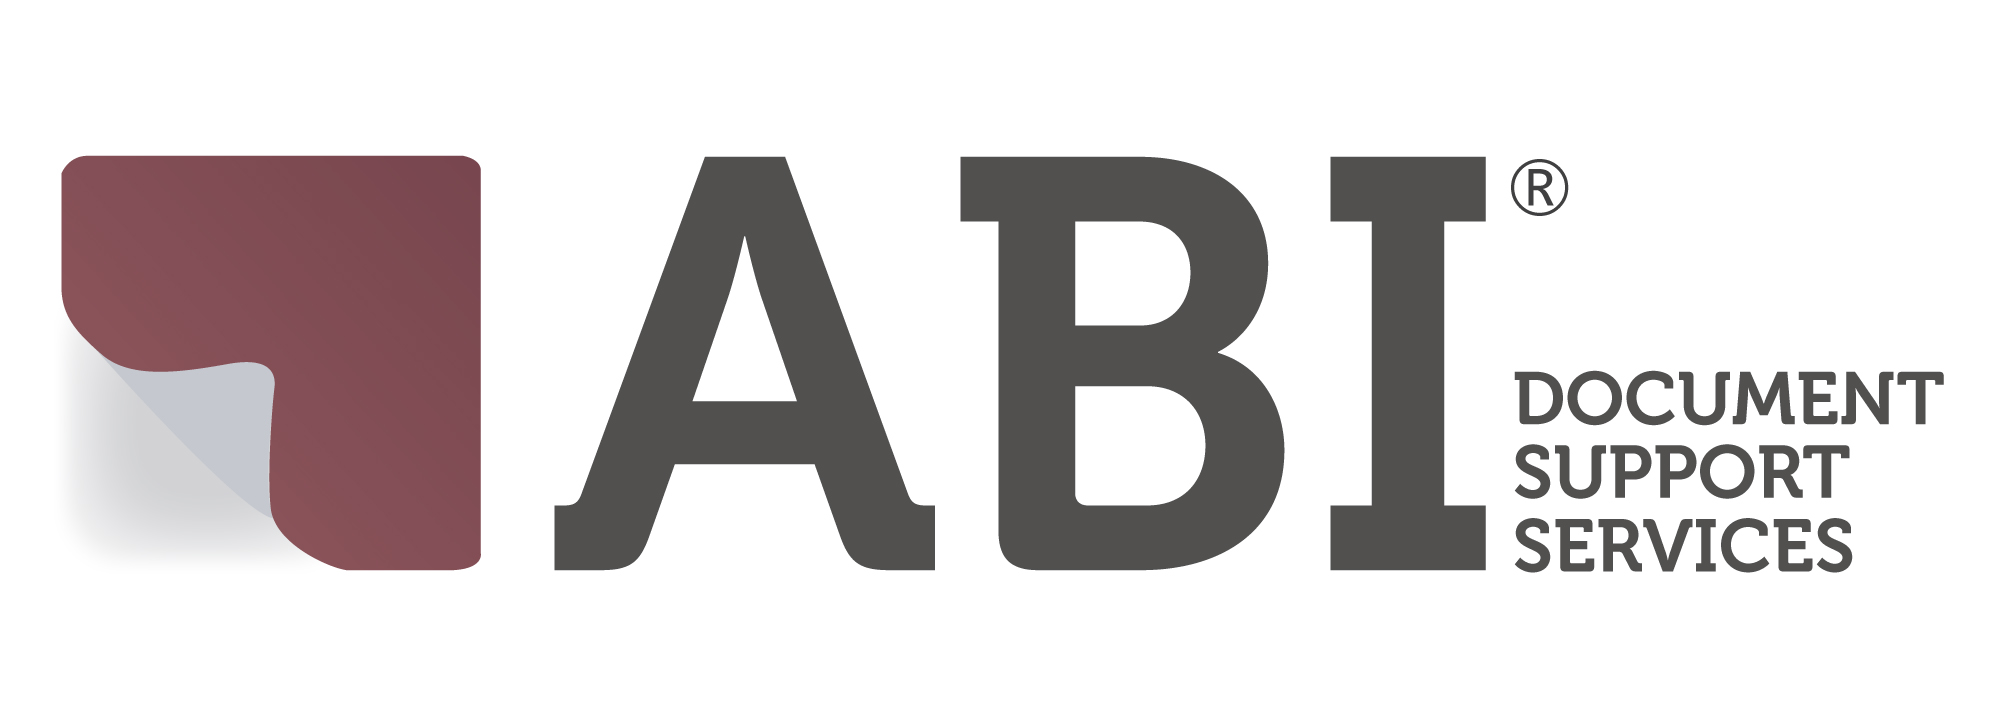 ABI Document Support Services logo